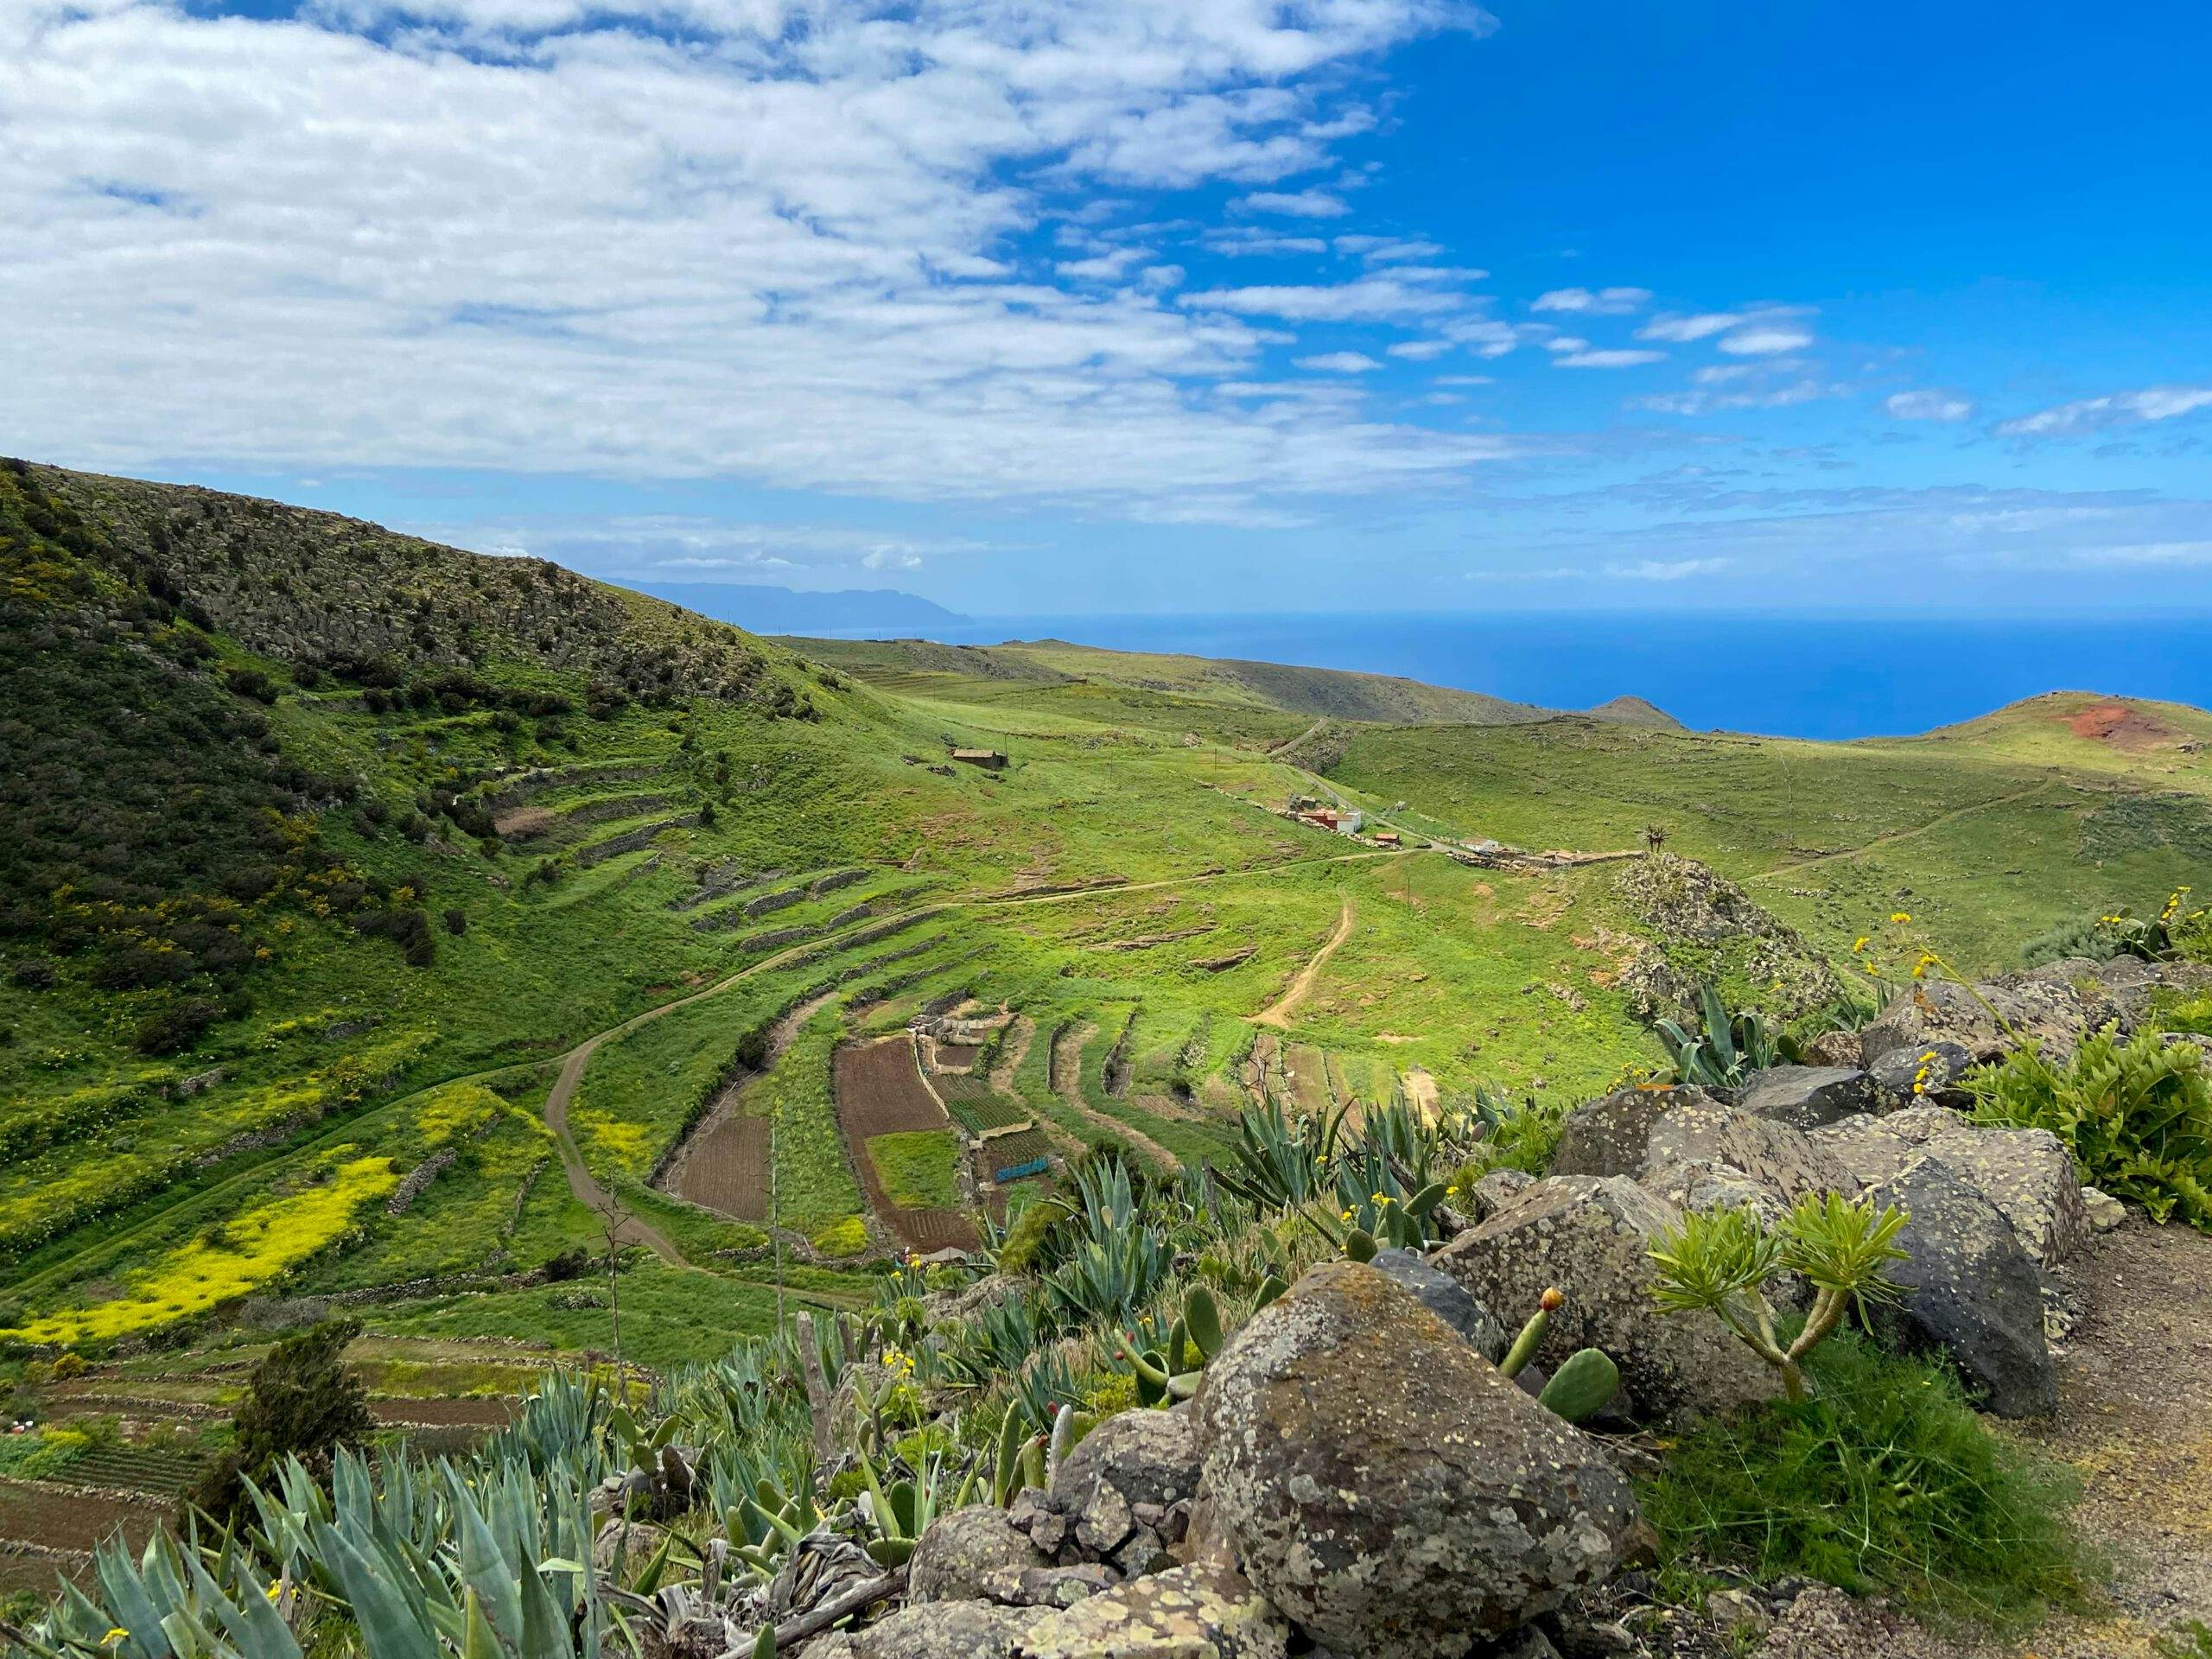 View of the plateau, the break-off edge and the neighbouring island of La Gomera